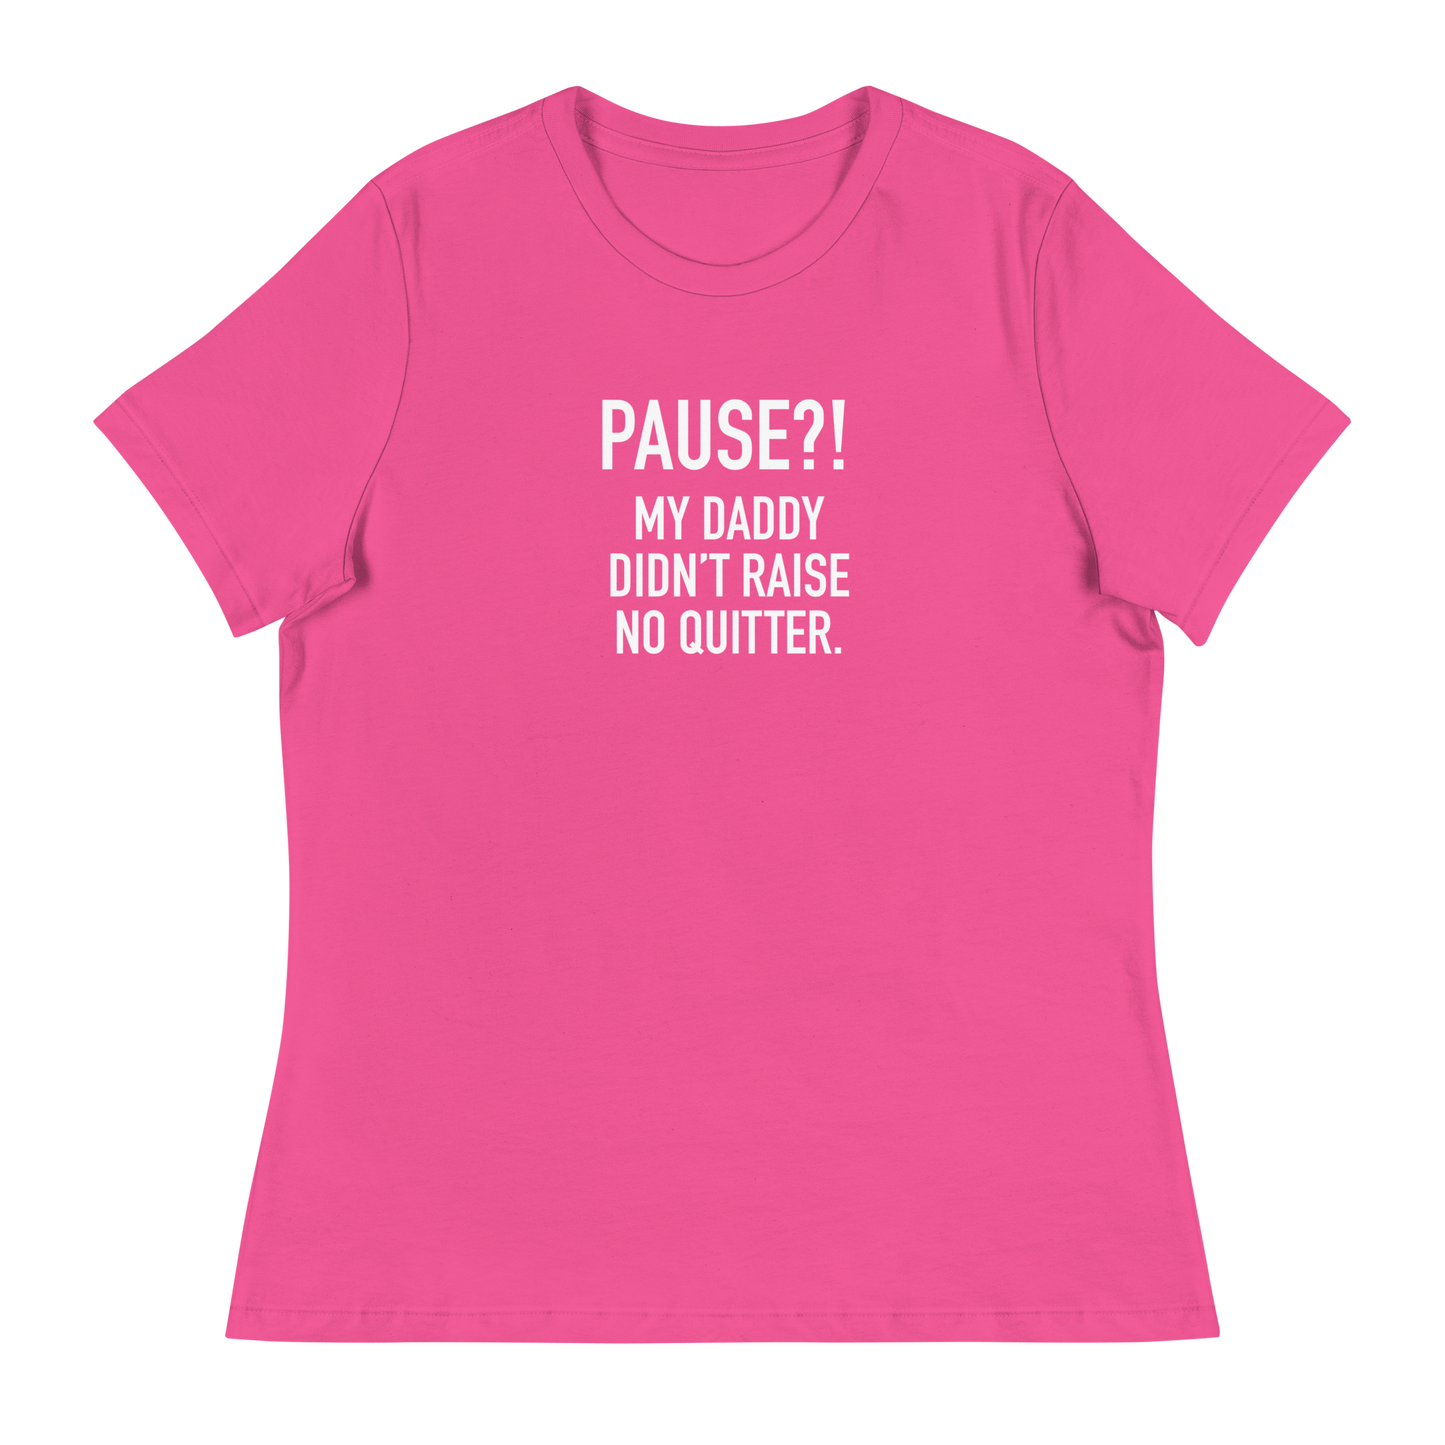 Women's - GAMER - Pause?! My Daddy Didn't Raise No Quitter. - Funny T-Shirt